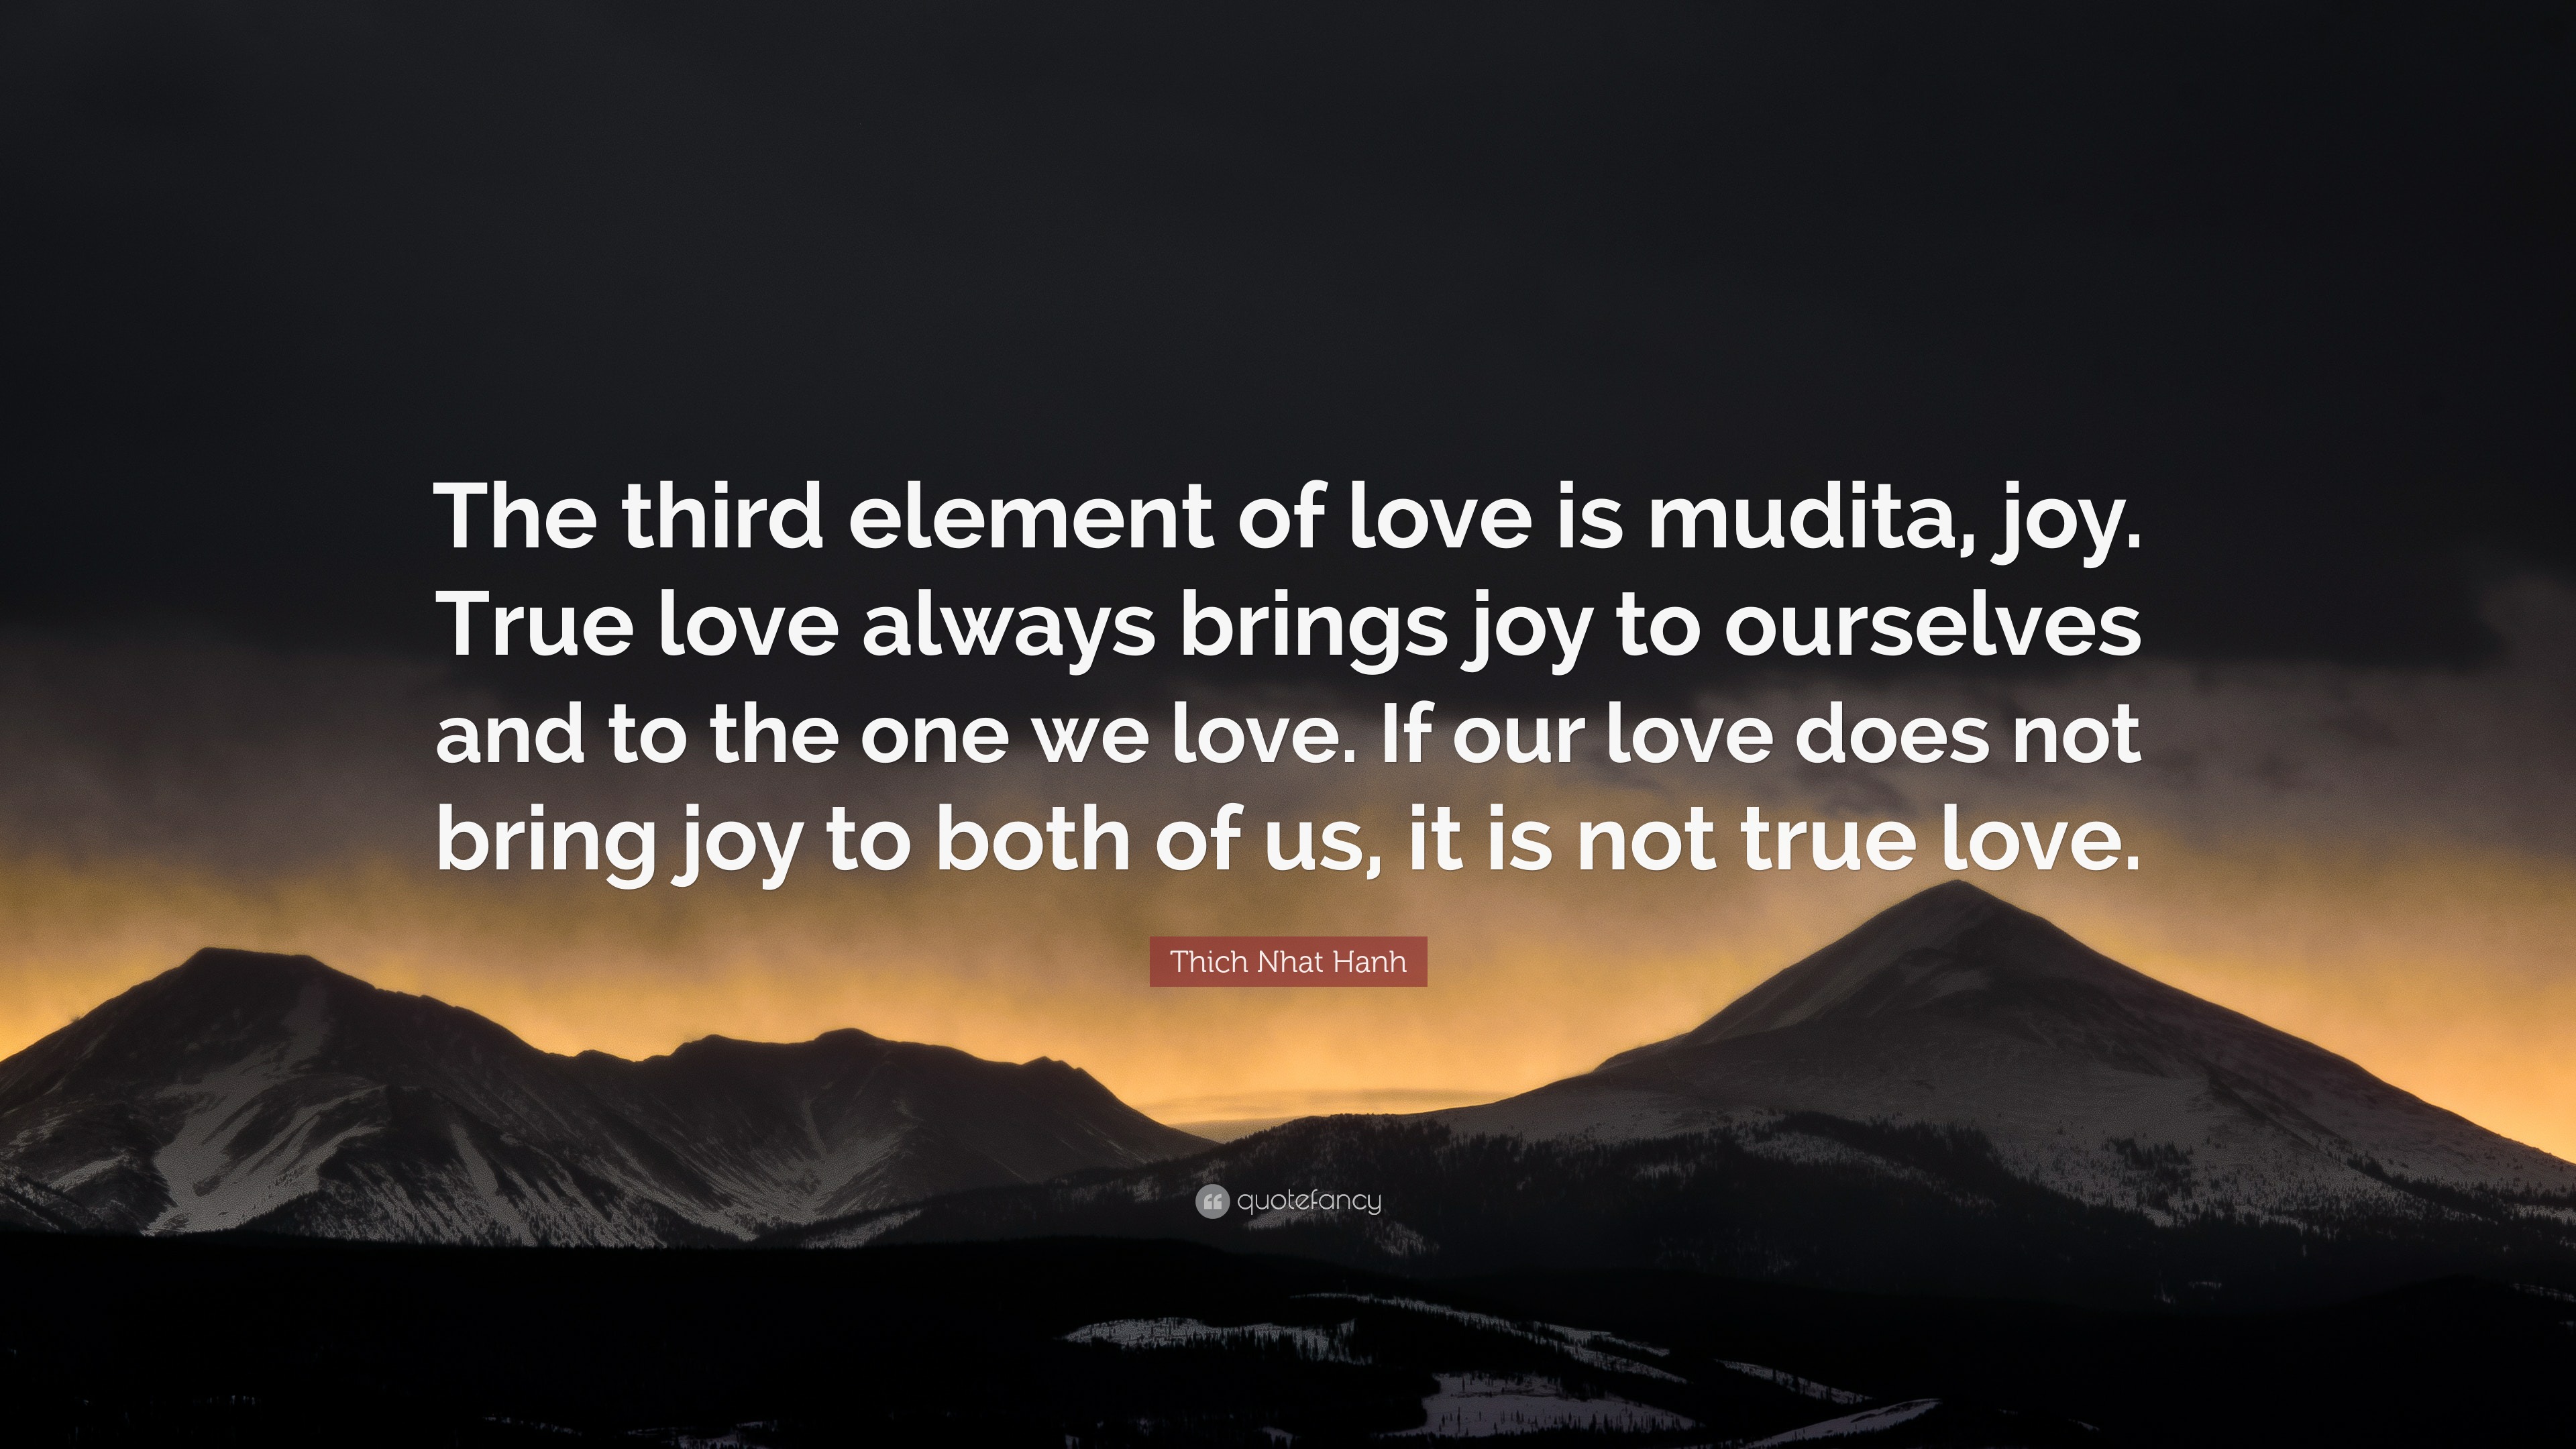 Thich Nhat Hanh Quote: “The third element of love is mudita, joy. True love  always brings joy to ourselves and to the one we love. If our love d”